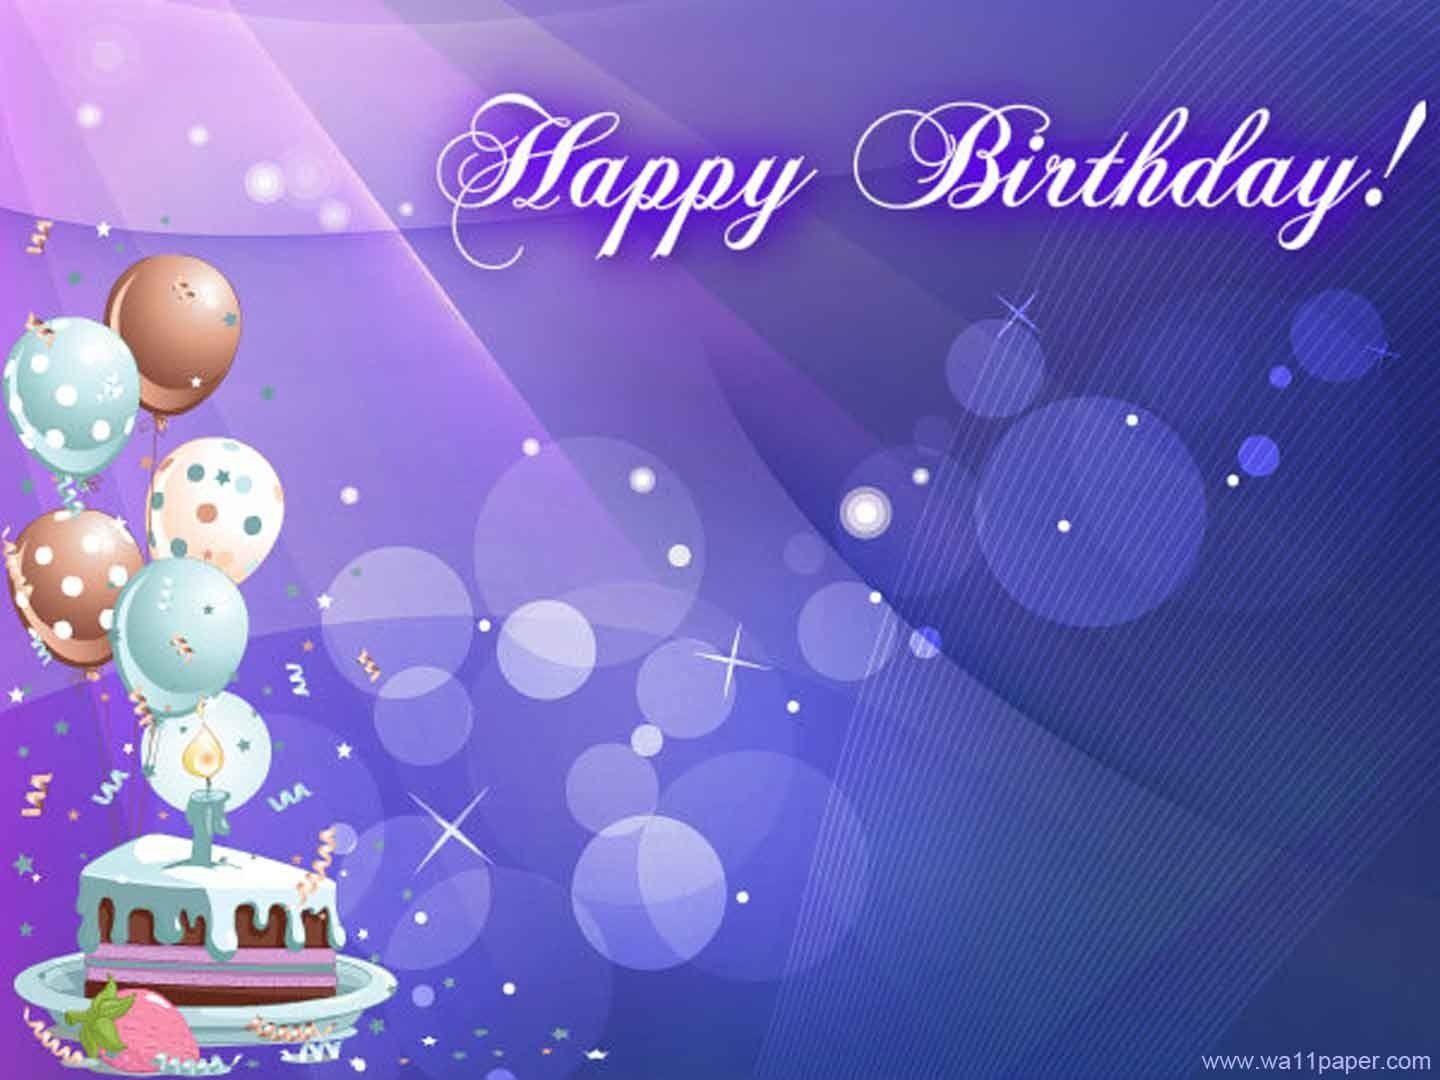 Birthday Background Hd Images